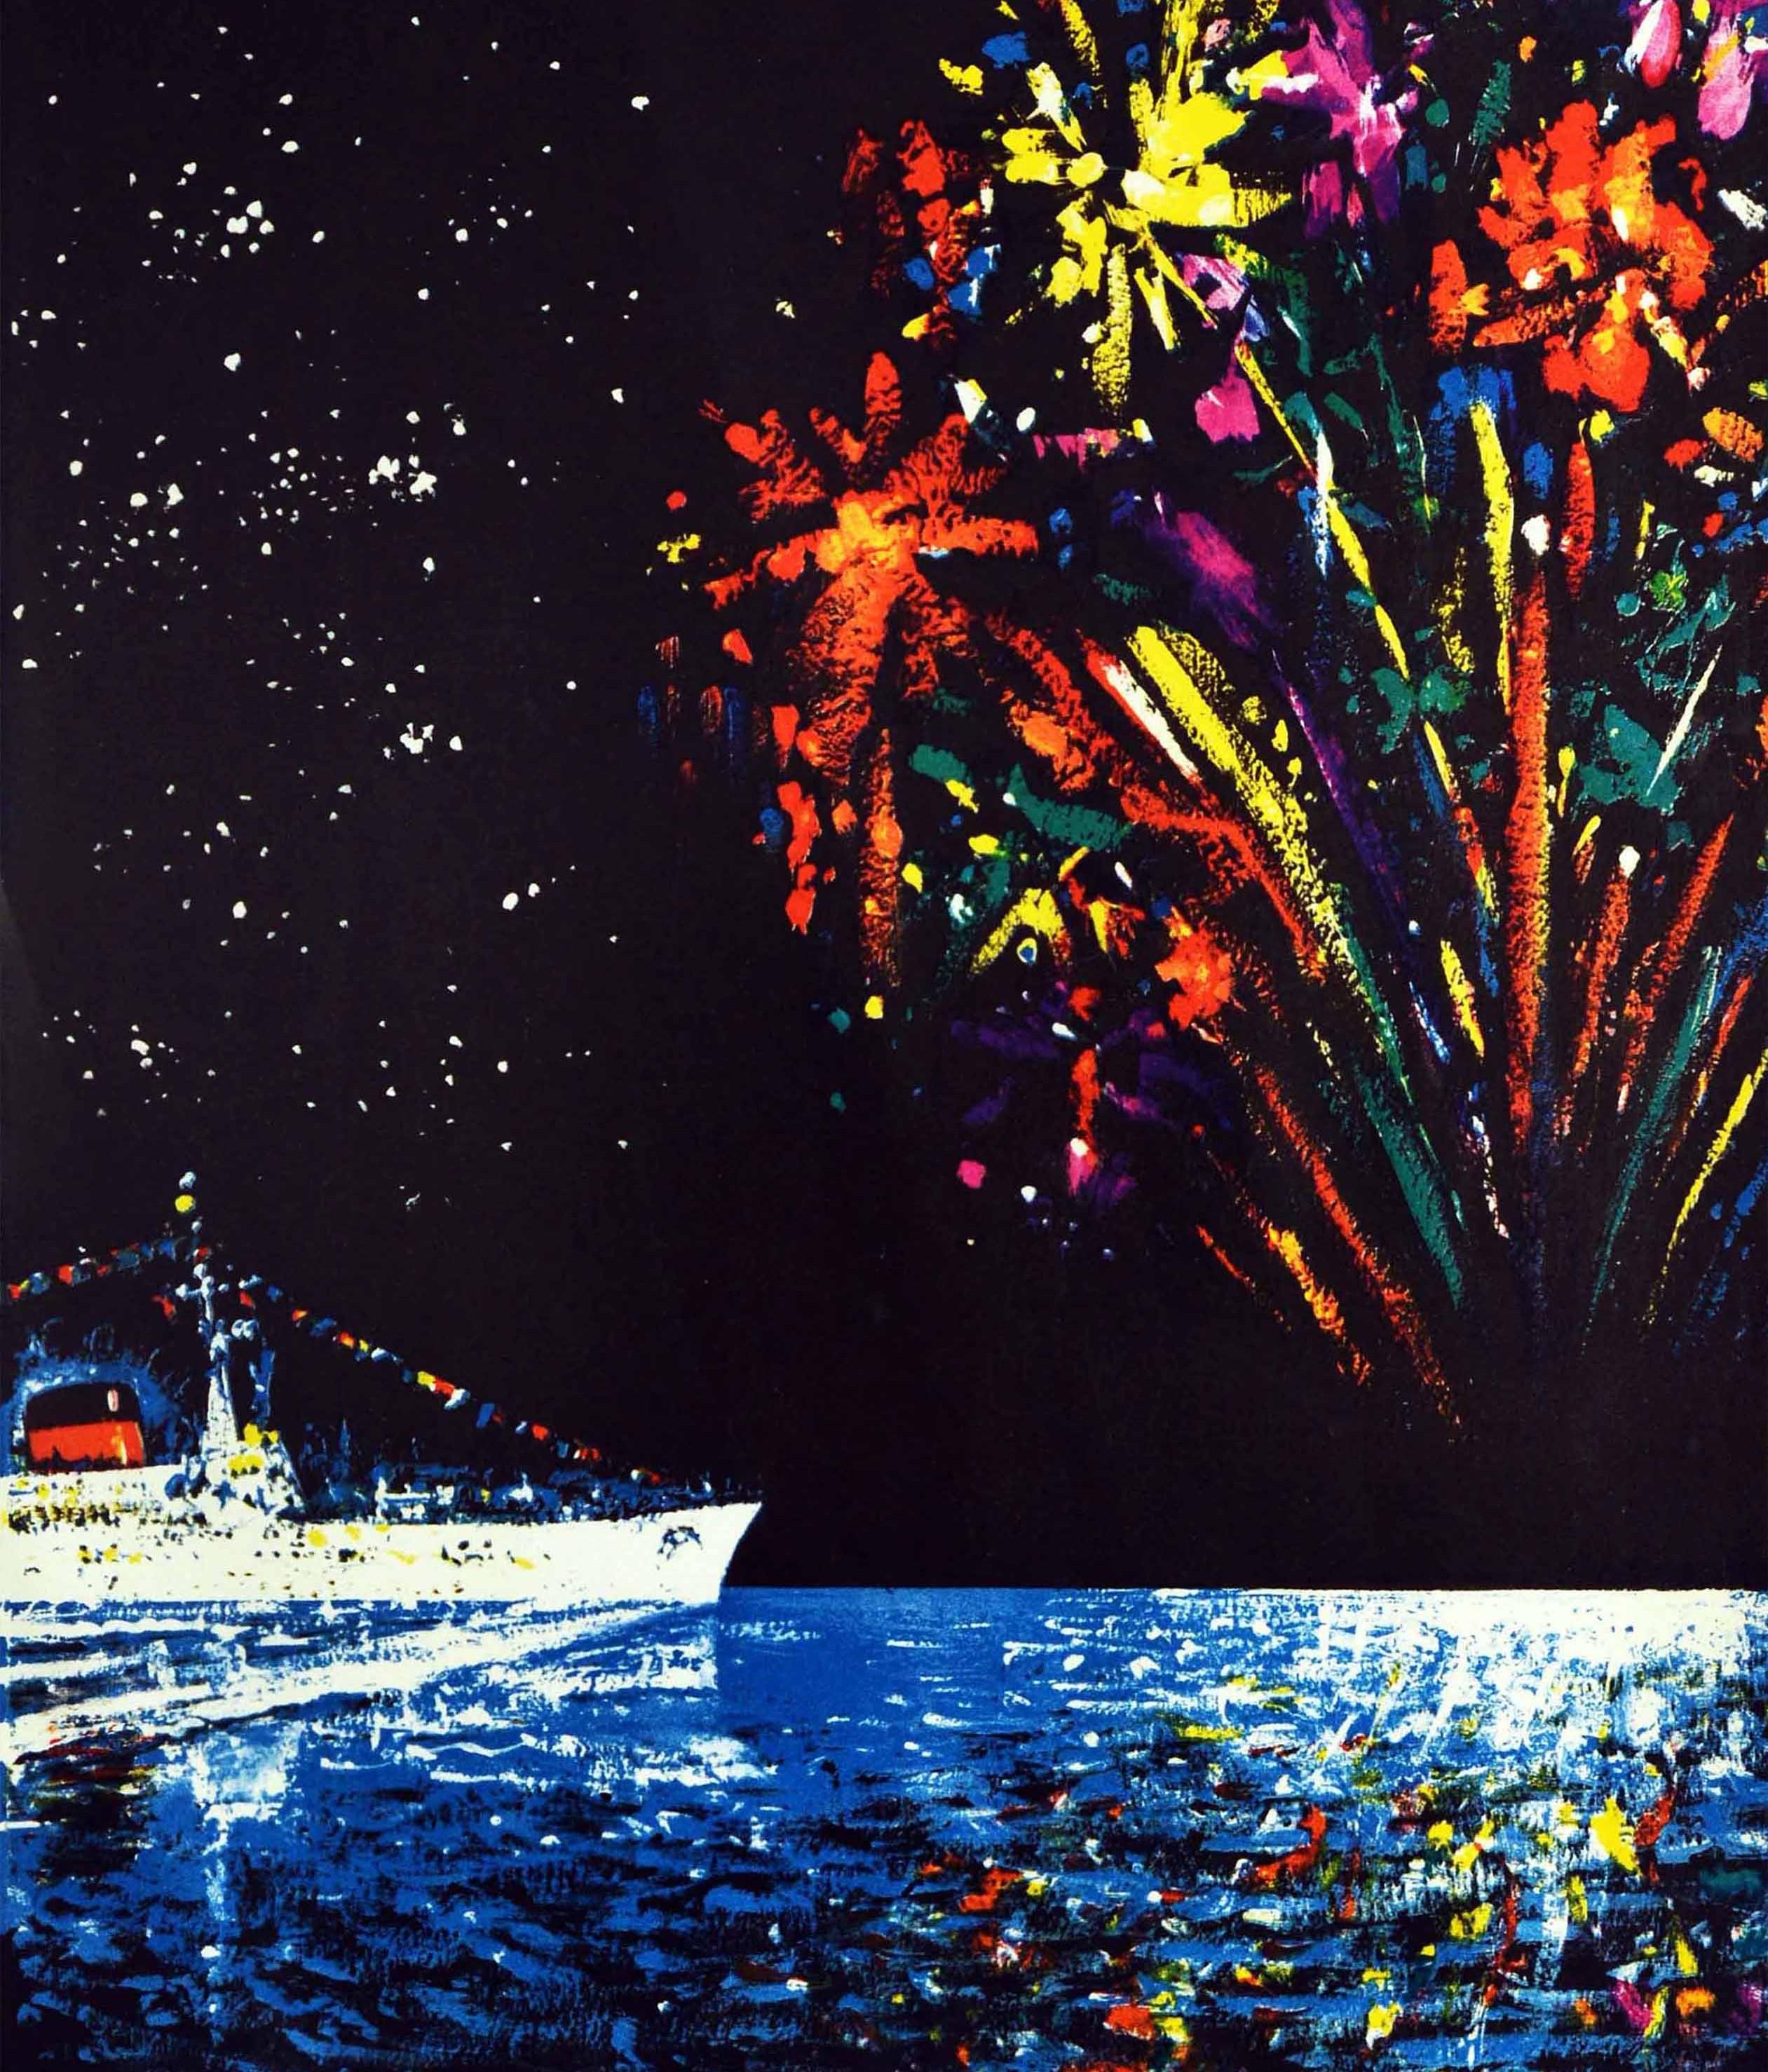 Mid-20th Century Original Vintage Cruise Travel Poster Toujours Fete CGT Ocean Liner Fireworks